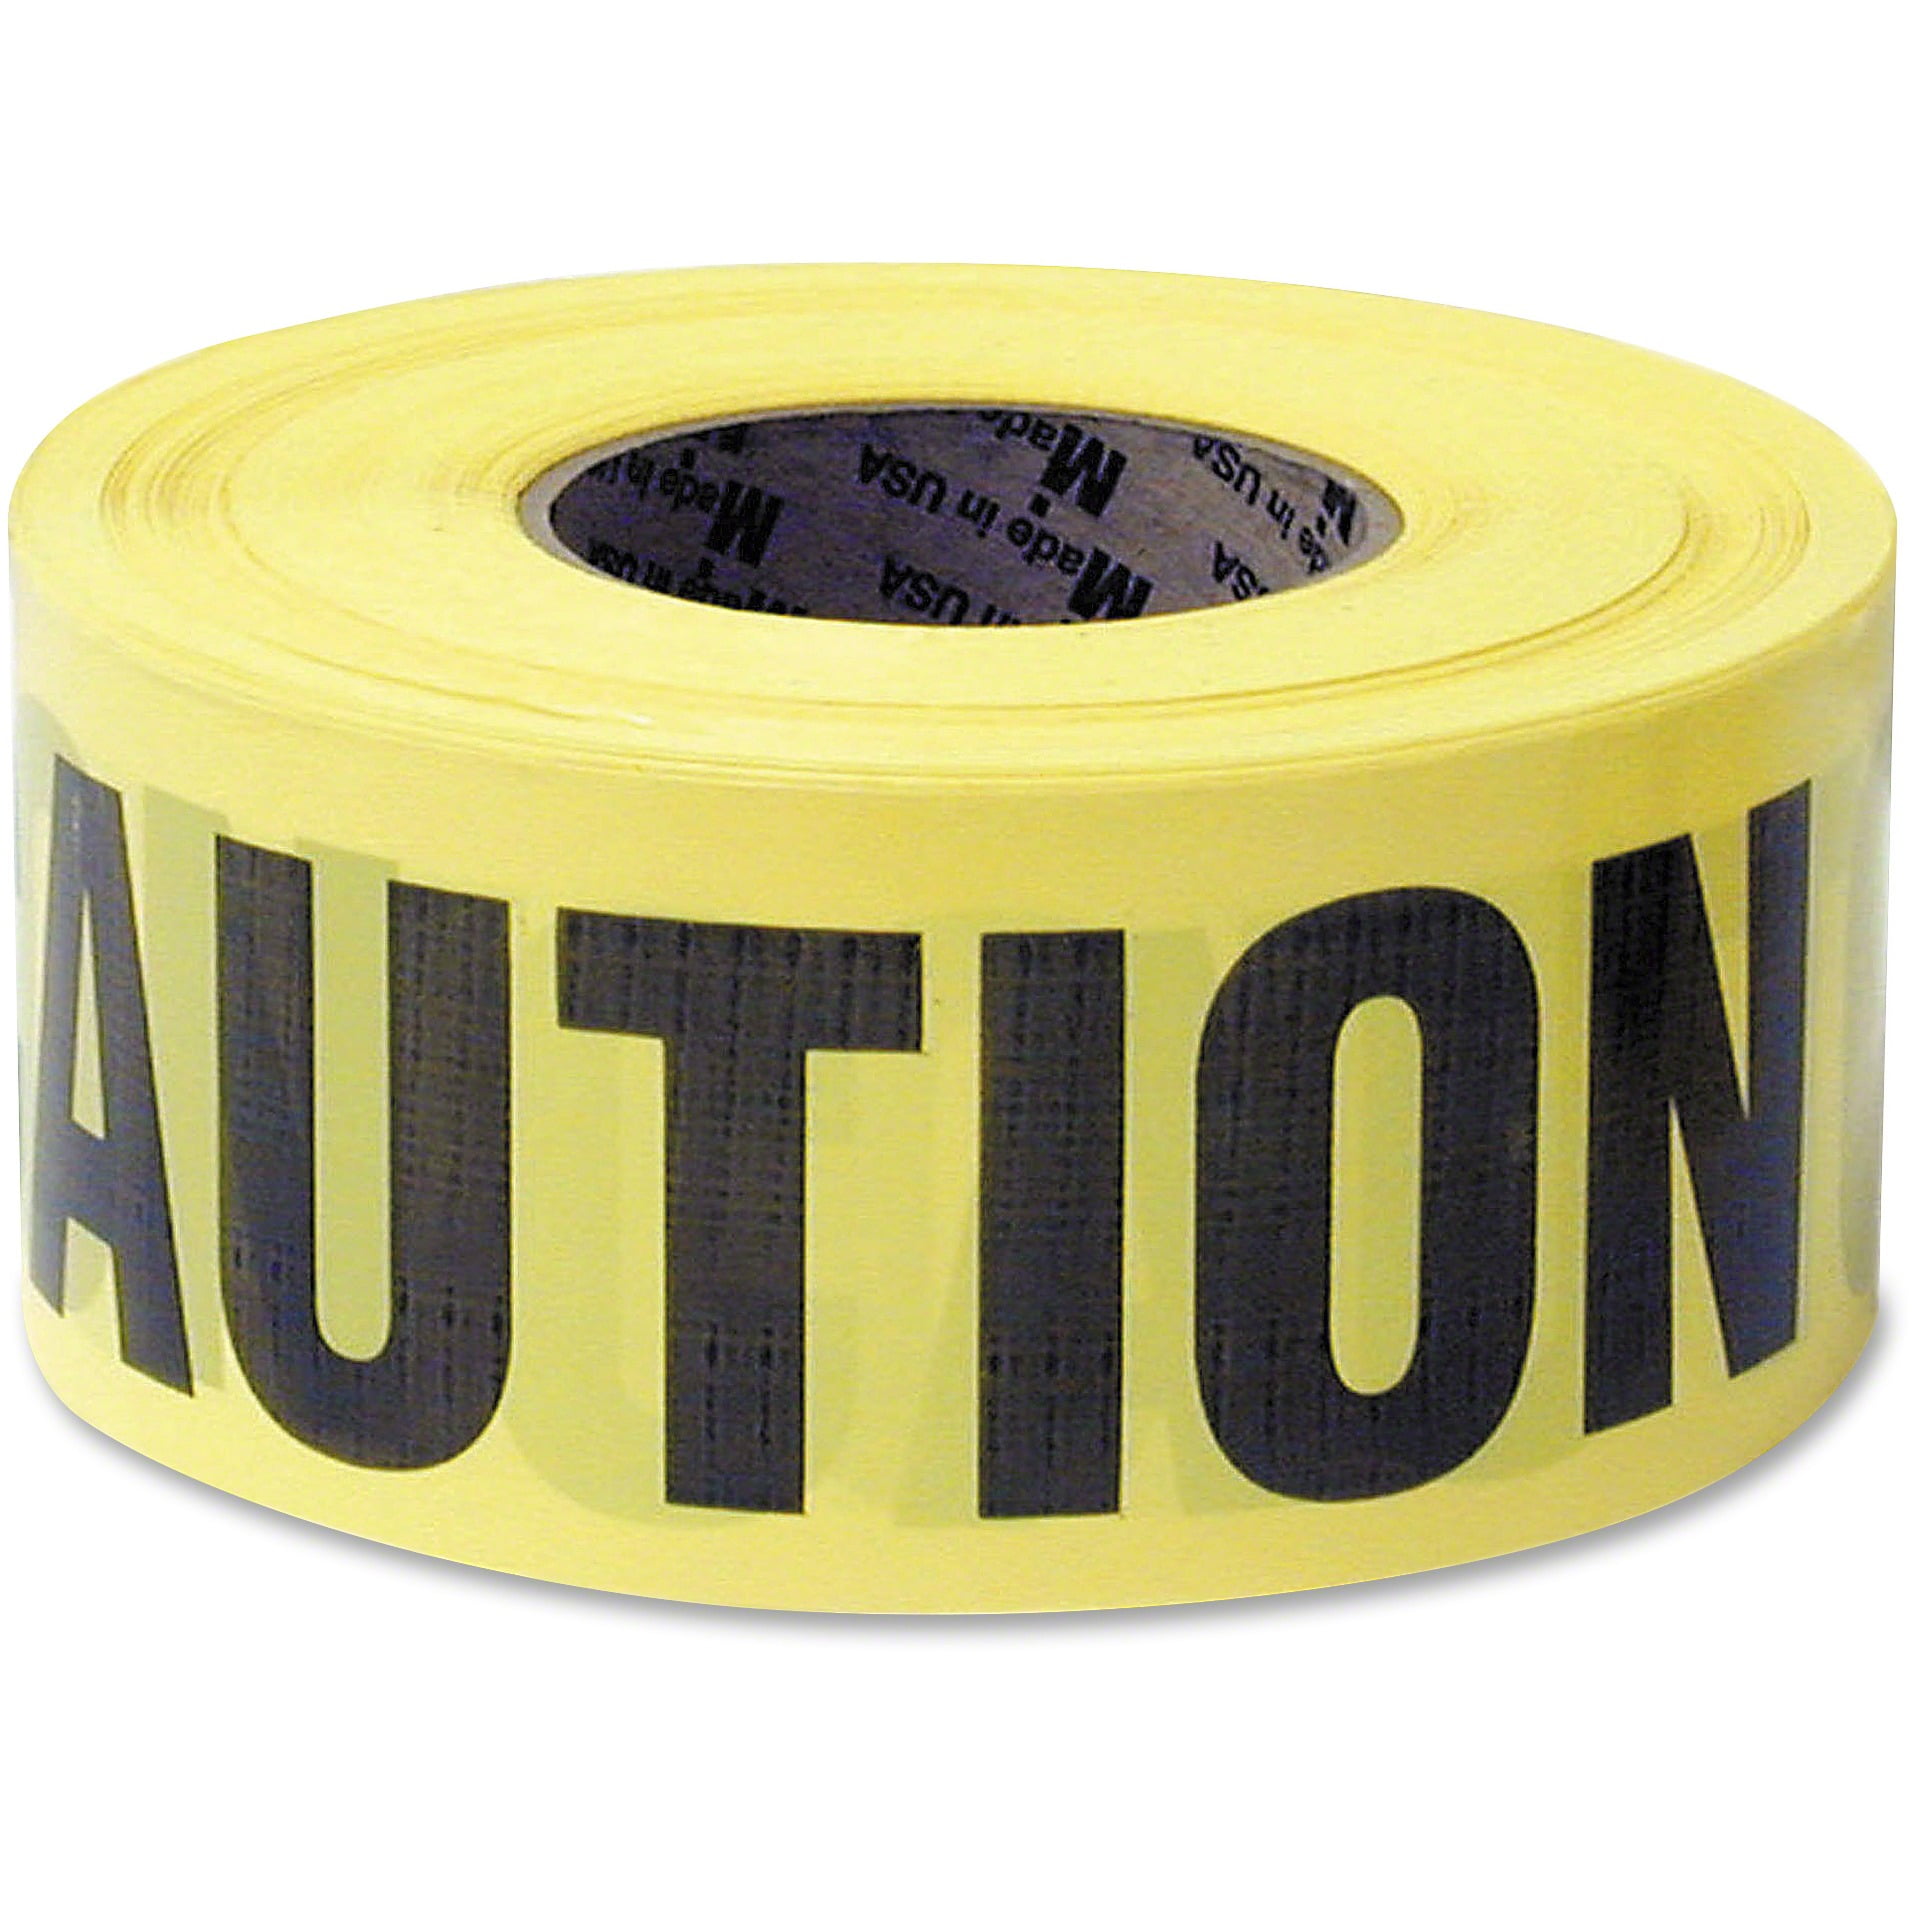 CH Hanson 16000 Caution Barricade Safety Tape Yellow 3" x 1000 FT 